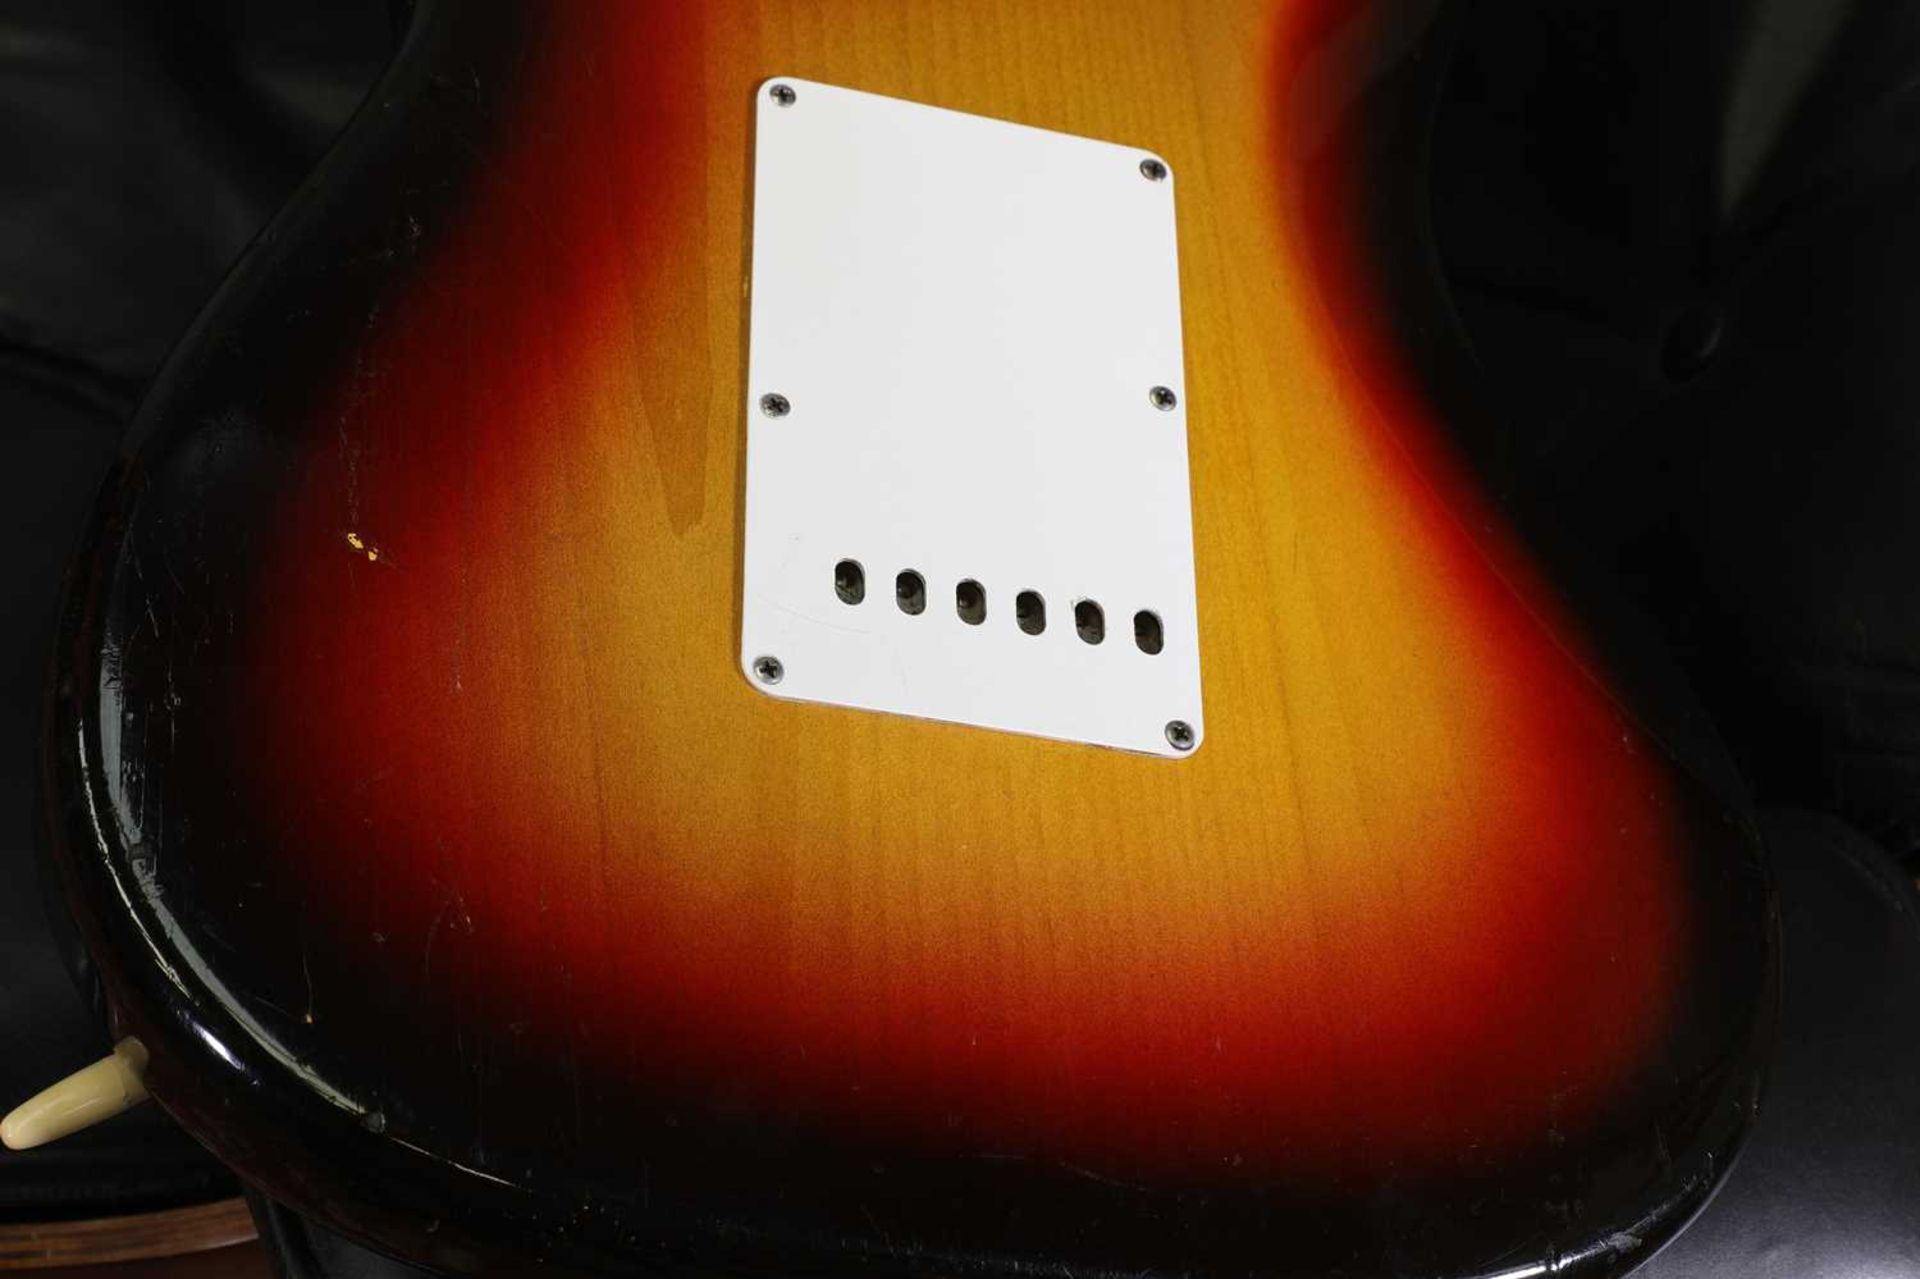 A 1963 Fender Stratocaster electric guitar, - Image 15 of 32